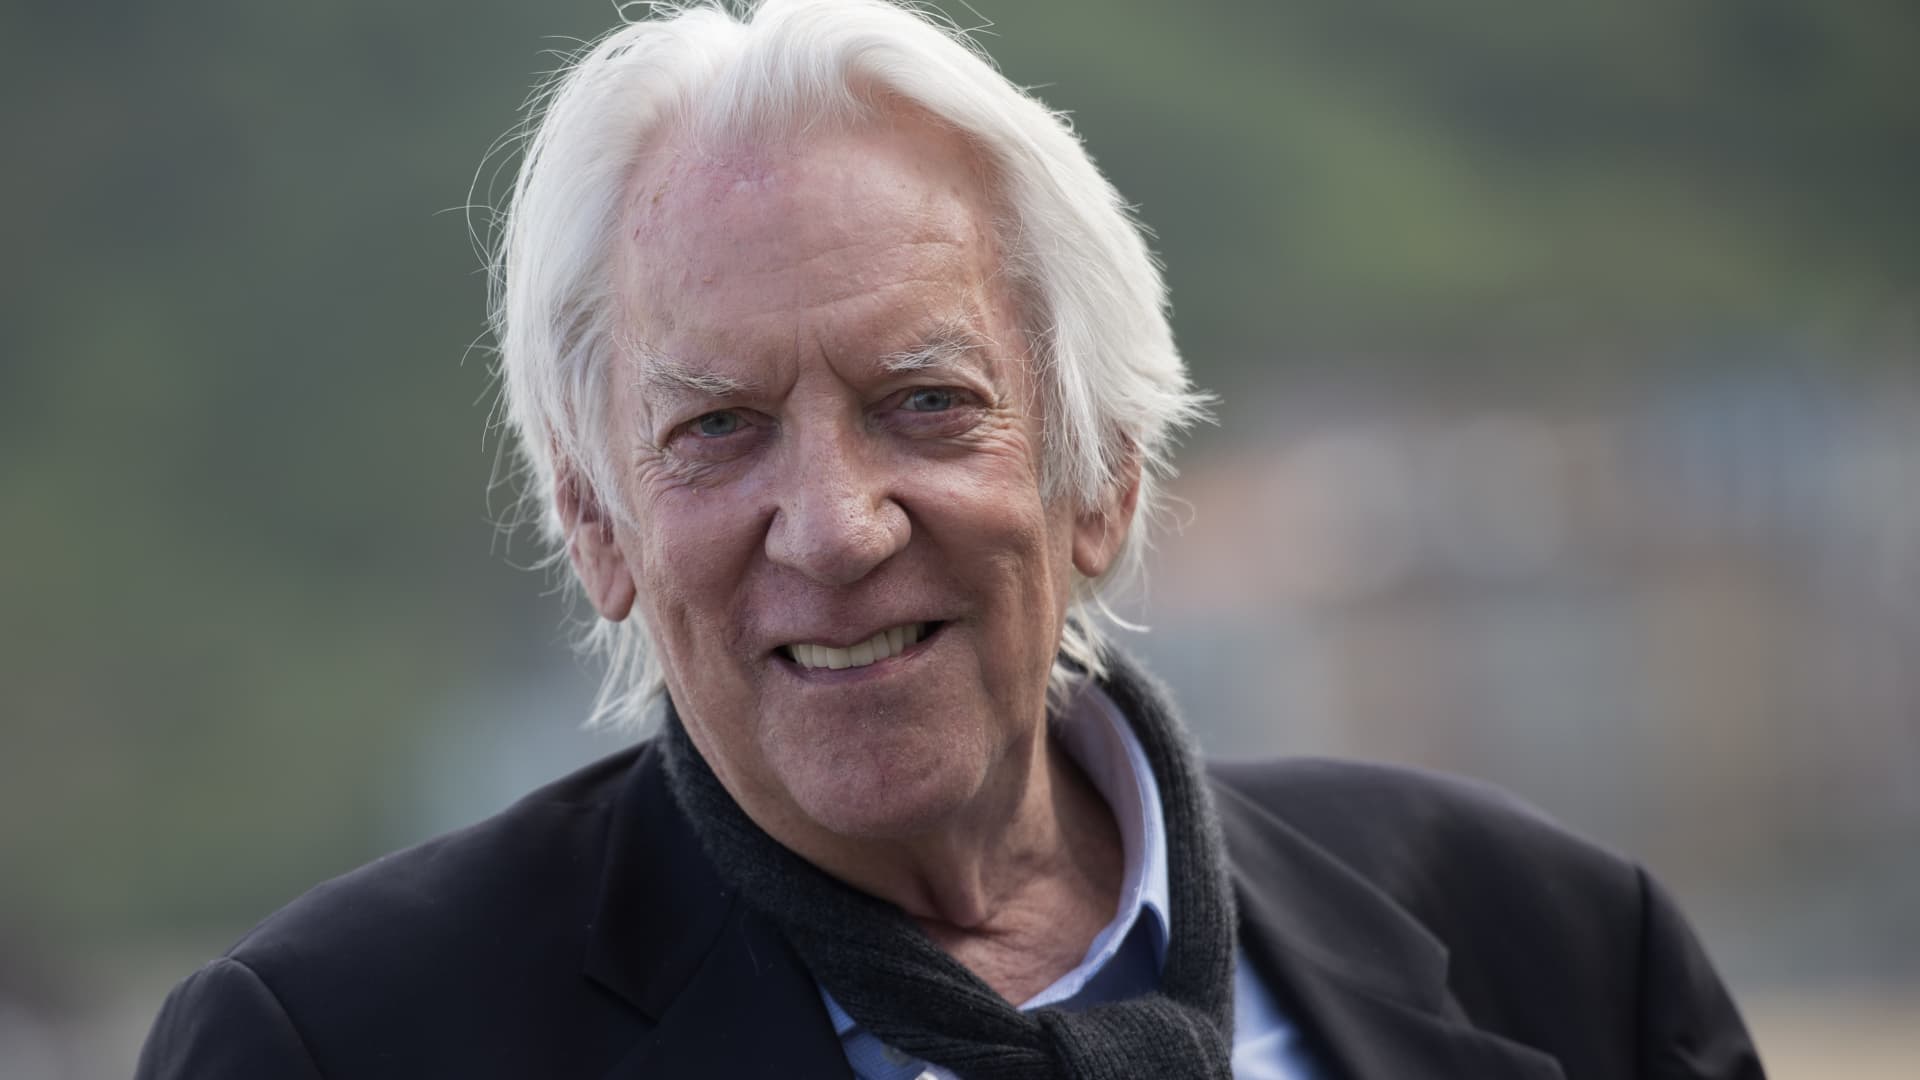 Donald Sutherland, Respected Actor of 'M*A*S*H' and 'The Hunger Games', Dies at 88